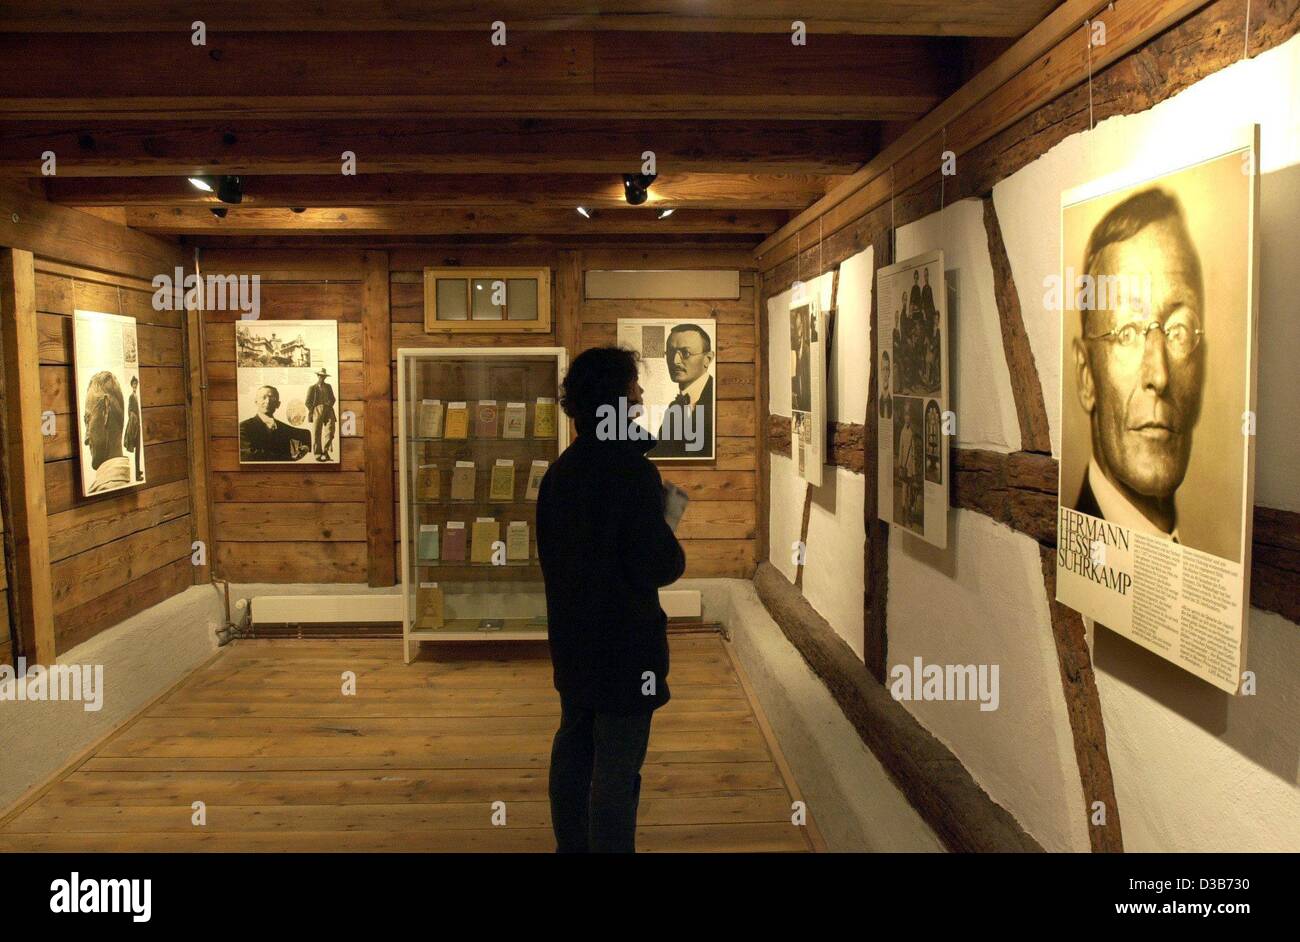 (dpa) - A visitor looks at the exhibition in the so-called 'Hesse-House' in Gaienhofen near Lake Constance, Germany, pictured 10 February 2002. German author and Nobel Prize laureate Hermann Hesse and his family lived in the village from 1904 till 1912, spending three years in this house. The half-t Stock Photo